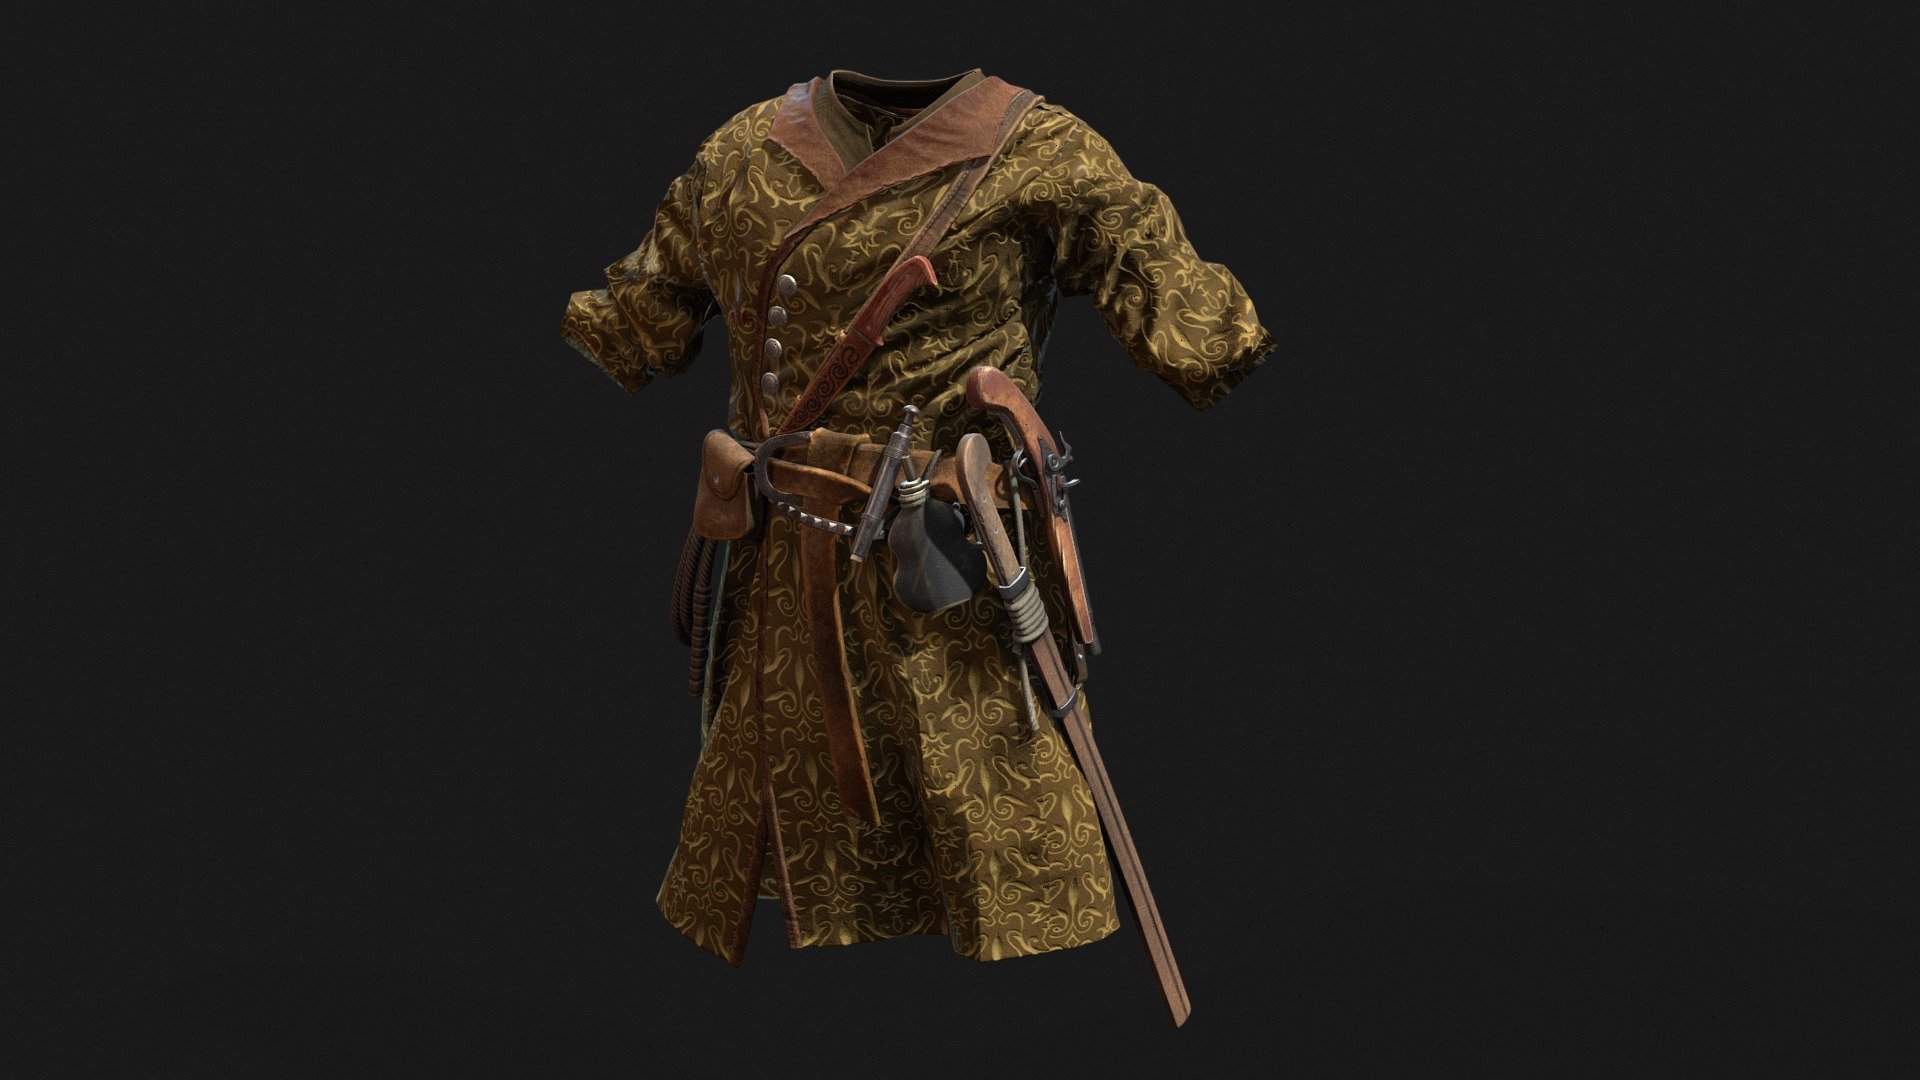 XVII century outfit in eastern europe style - XVII century outfit - 3D model by Person Unnamed (@Kirill.Gorjaev) 3d model